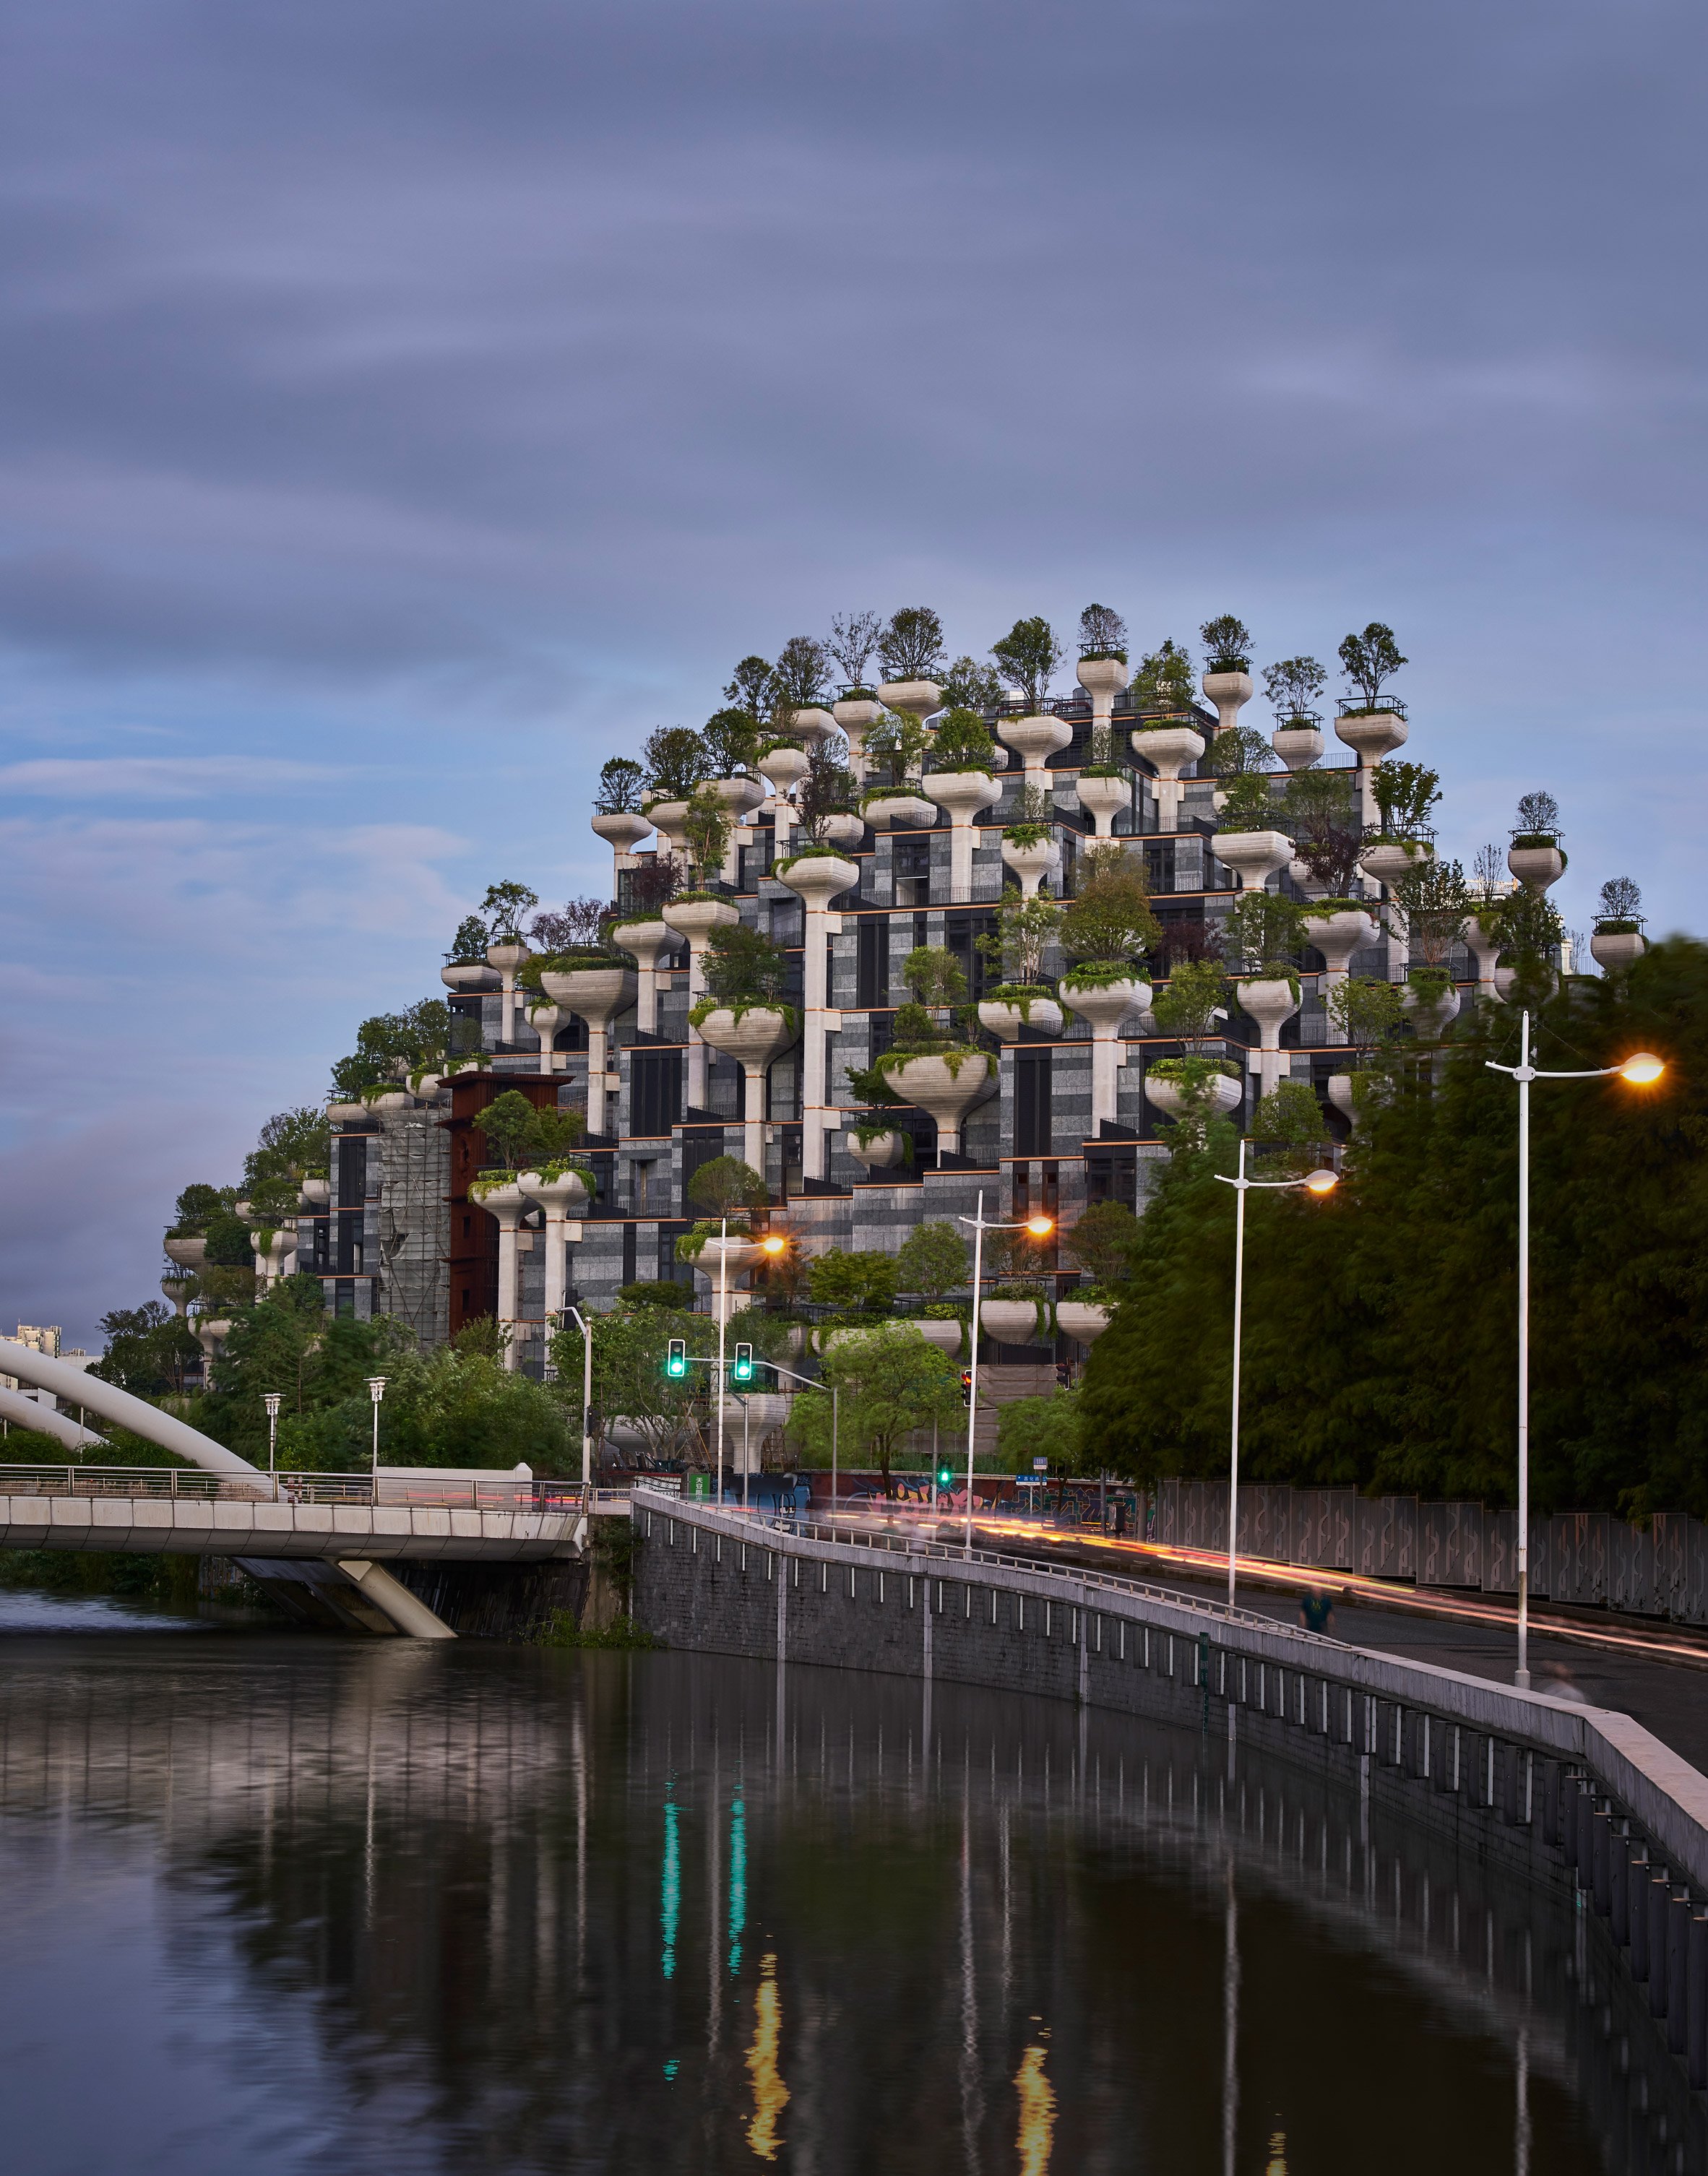 New photos of 1,000 Trees by Heatherwick Studio near completion in China